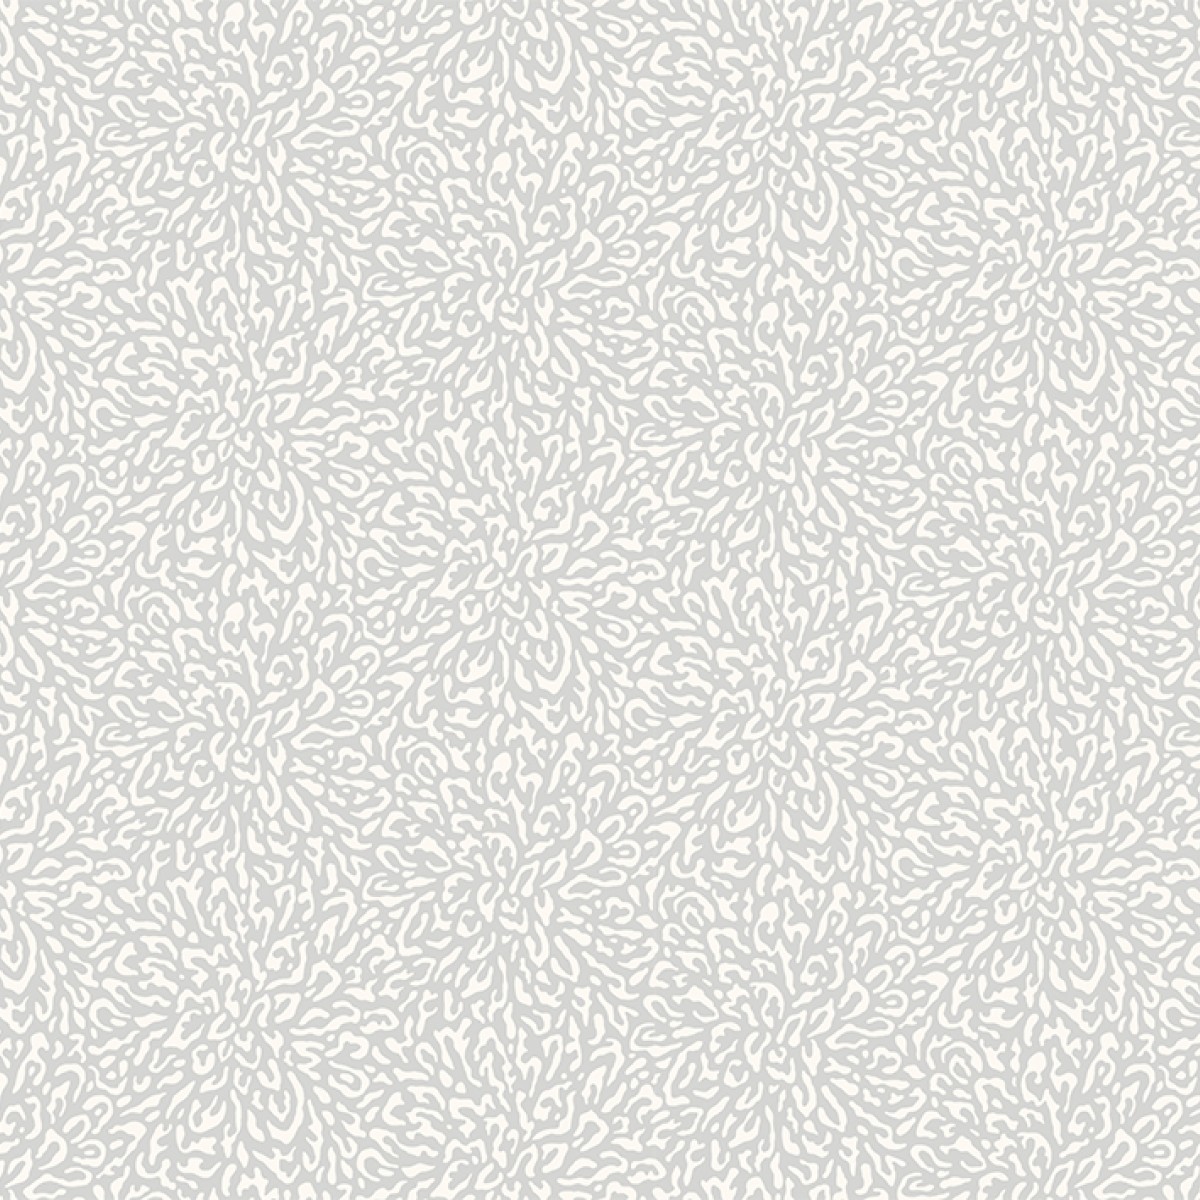 Tapet Corallo, Marble Grey Luxury Patterned, 1838 Wallcoverings, 5.3mp / rola, Tapet living 